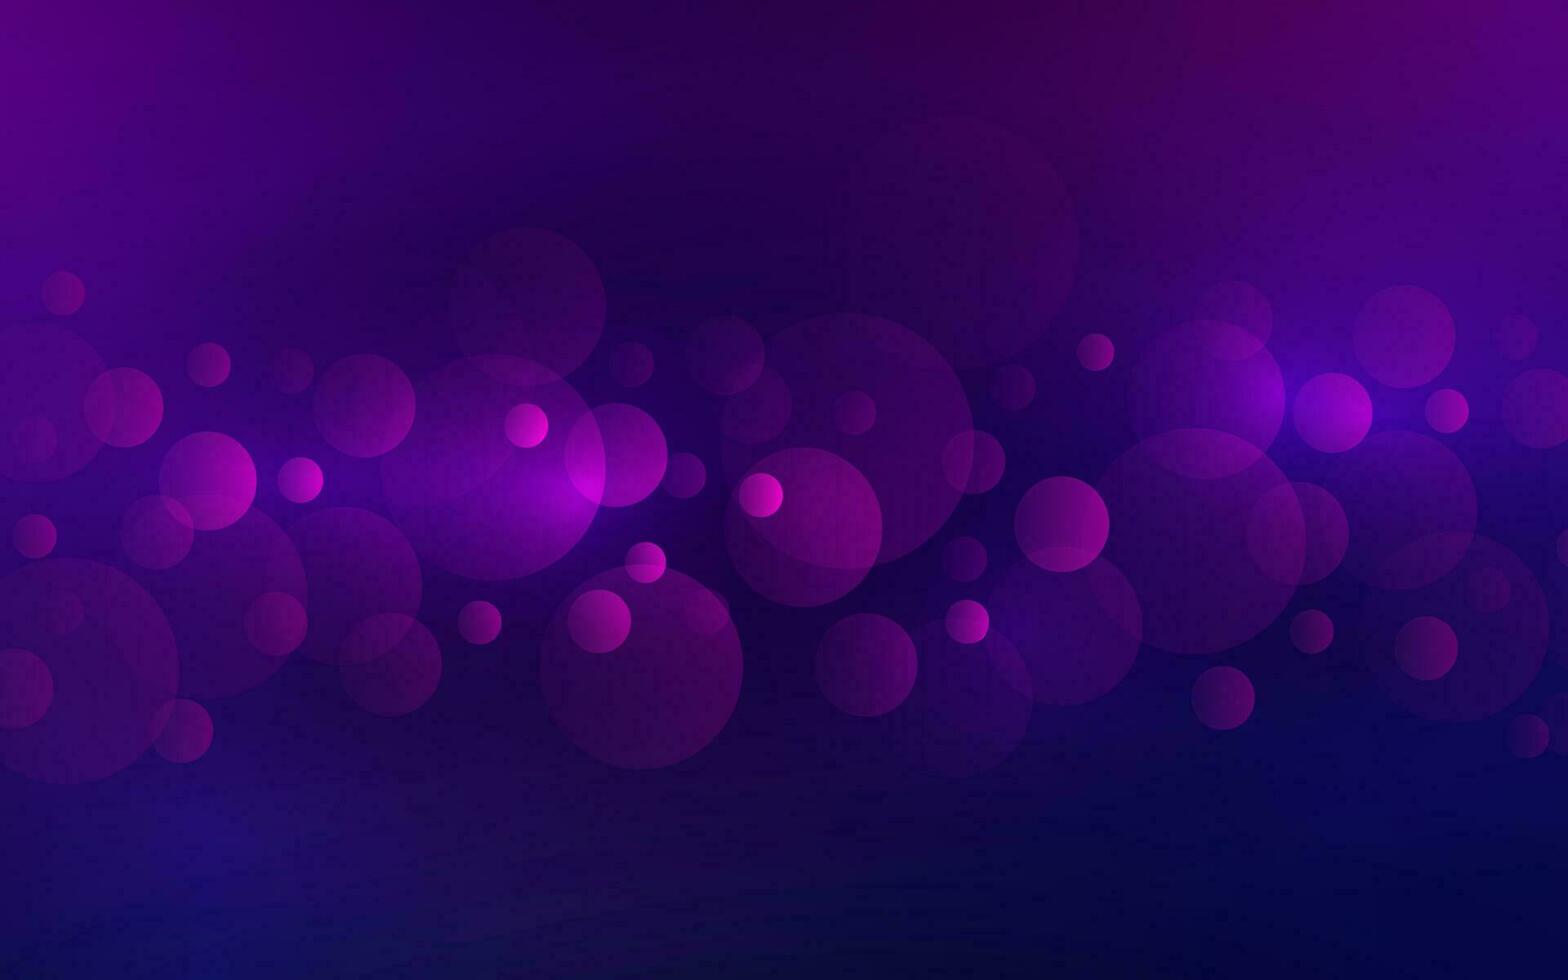 Blue and purple gradient background with circles set. vector